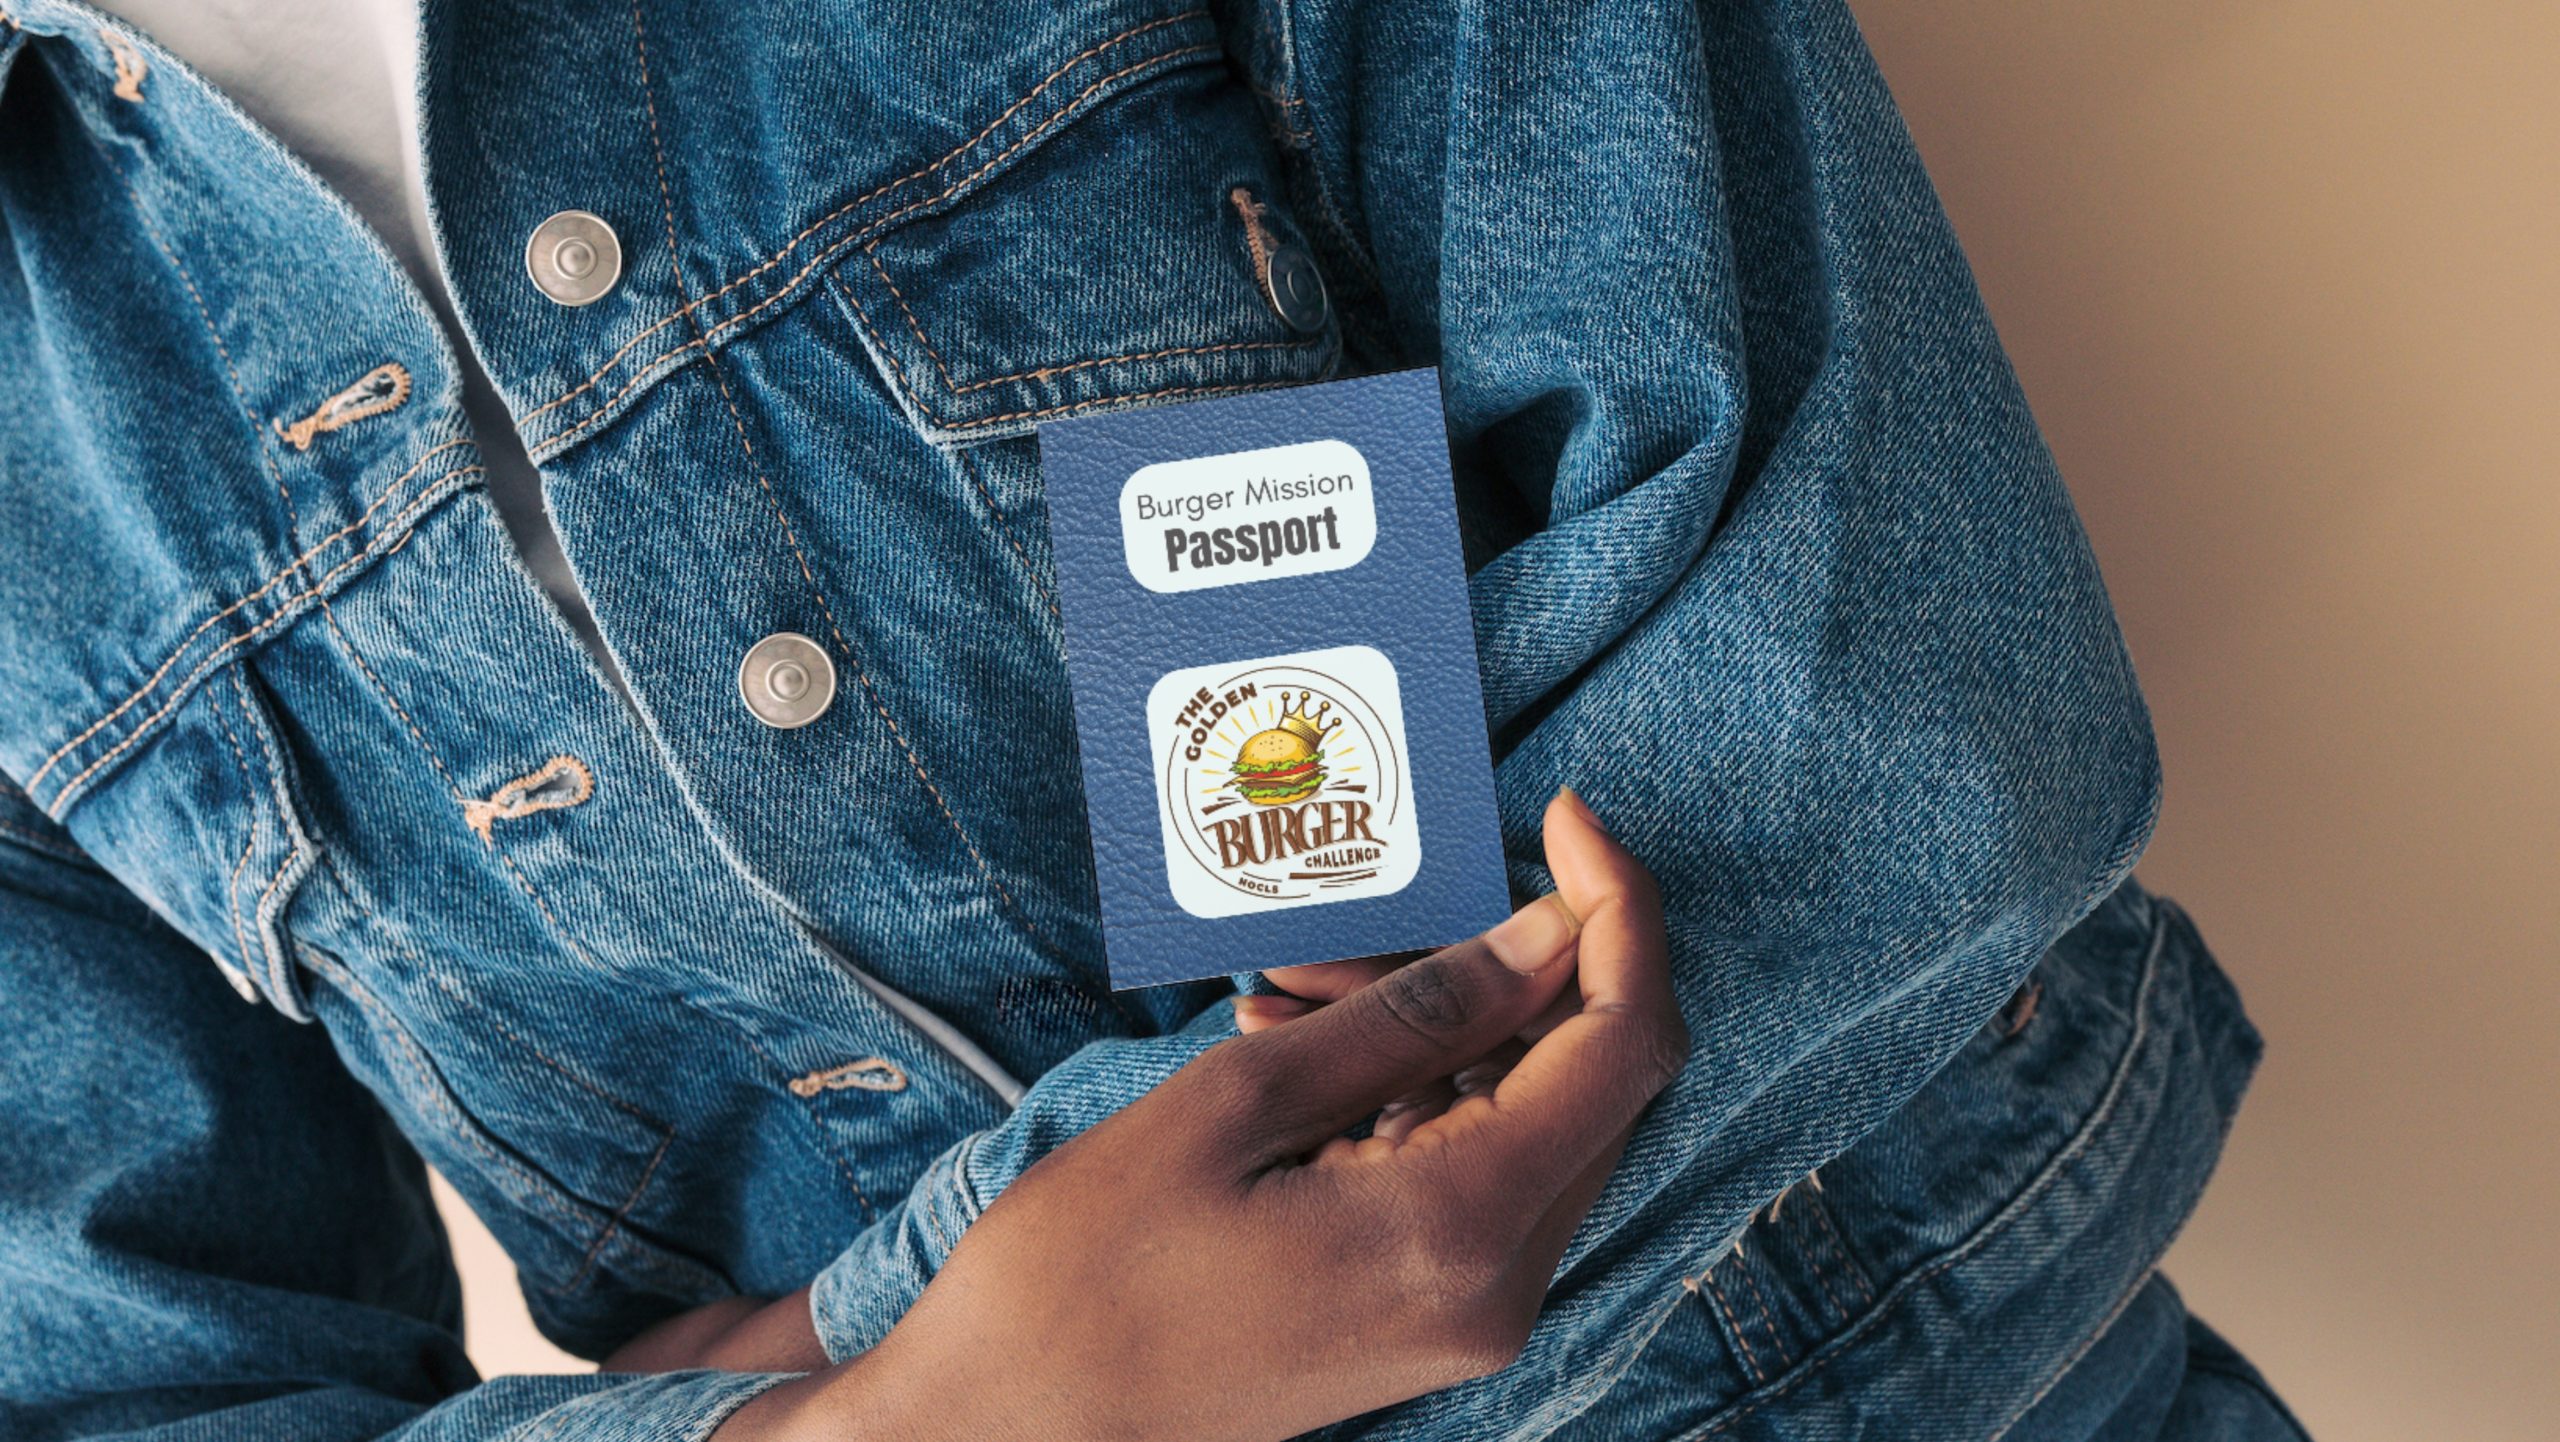 a person in a jean jacket holding a burger challenge prize passport.